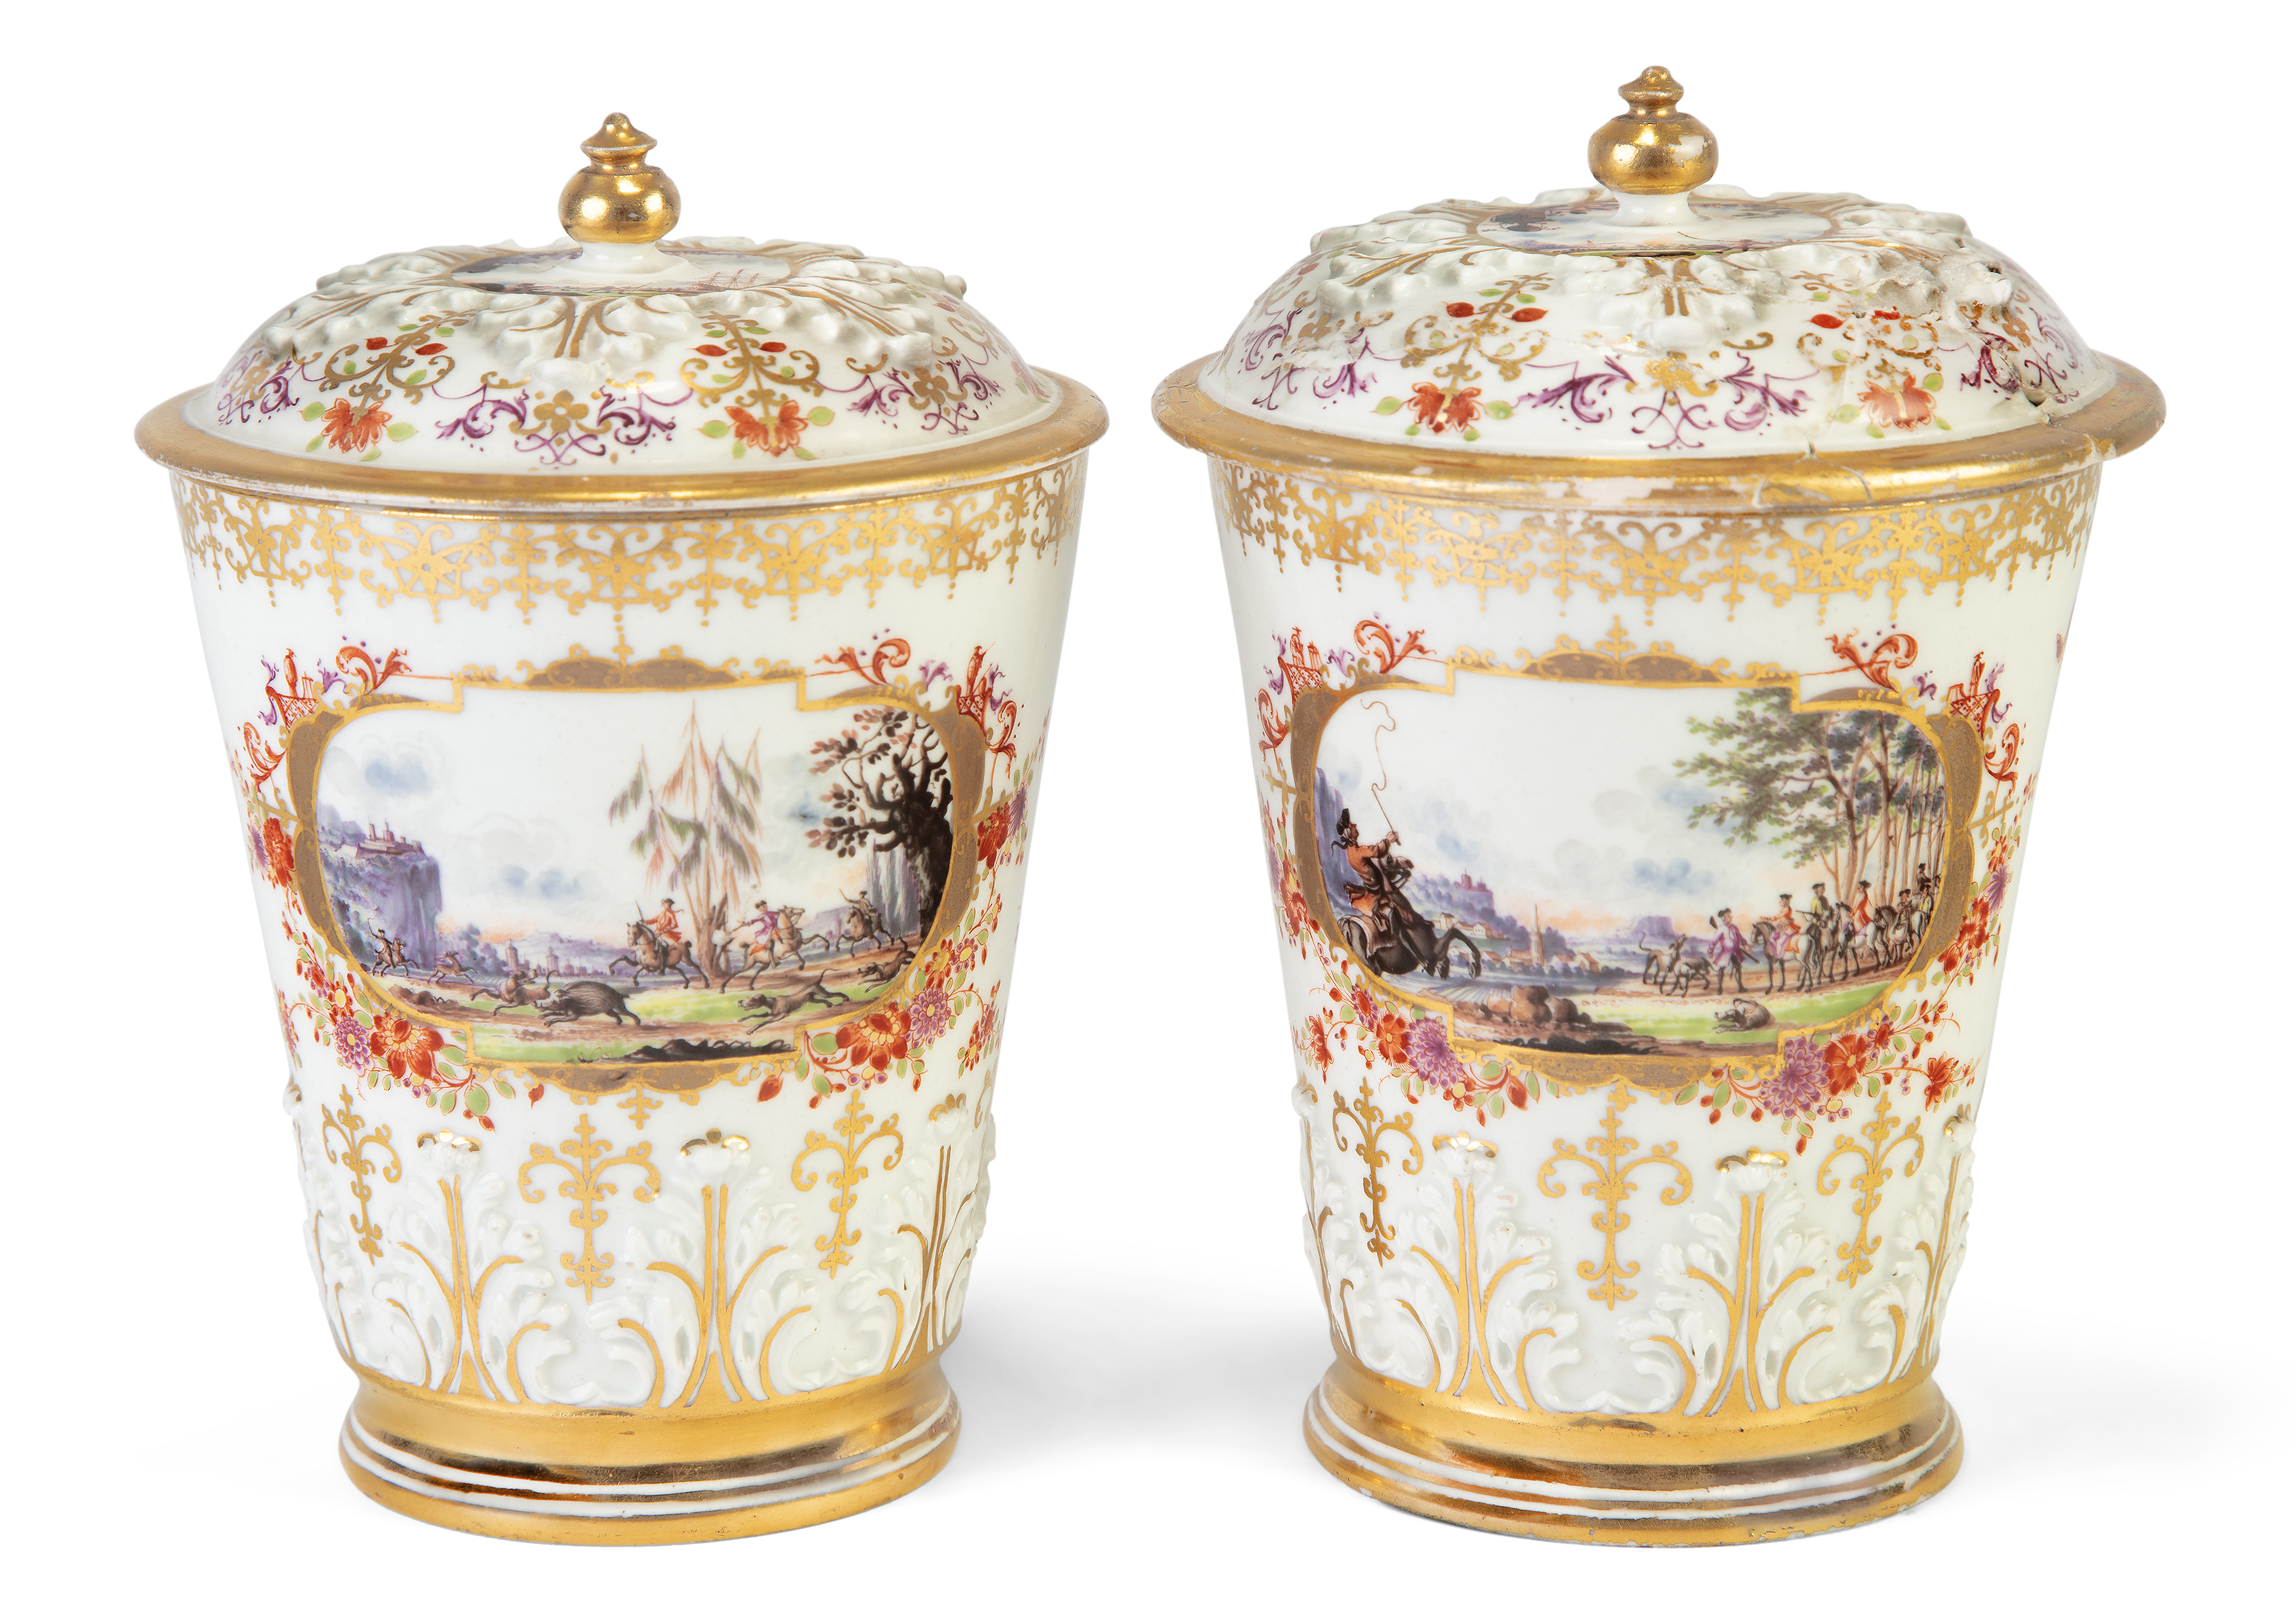 A pair of Meissen porcelain beakers and covers, 19th century, blue crossed swords marks, gilt 1. ... - Image 2 of 5